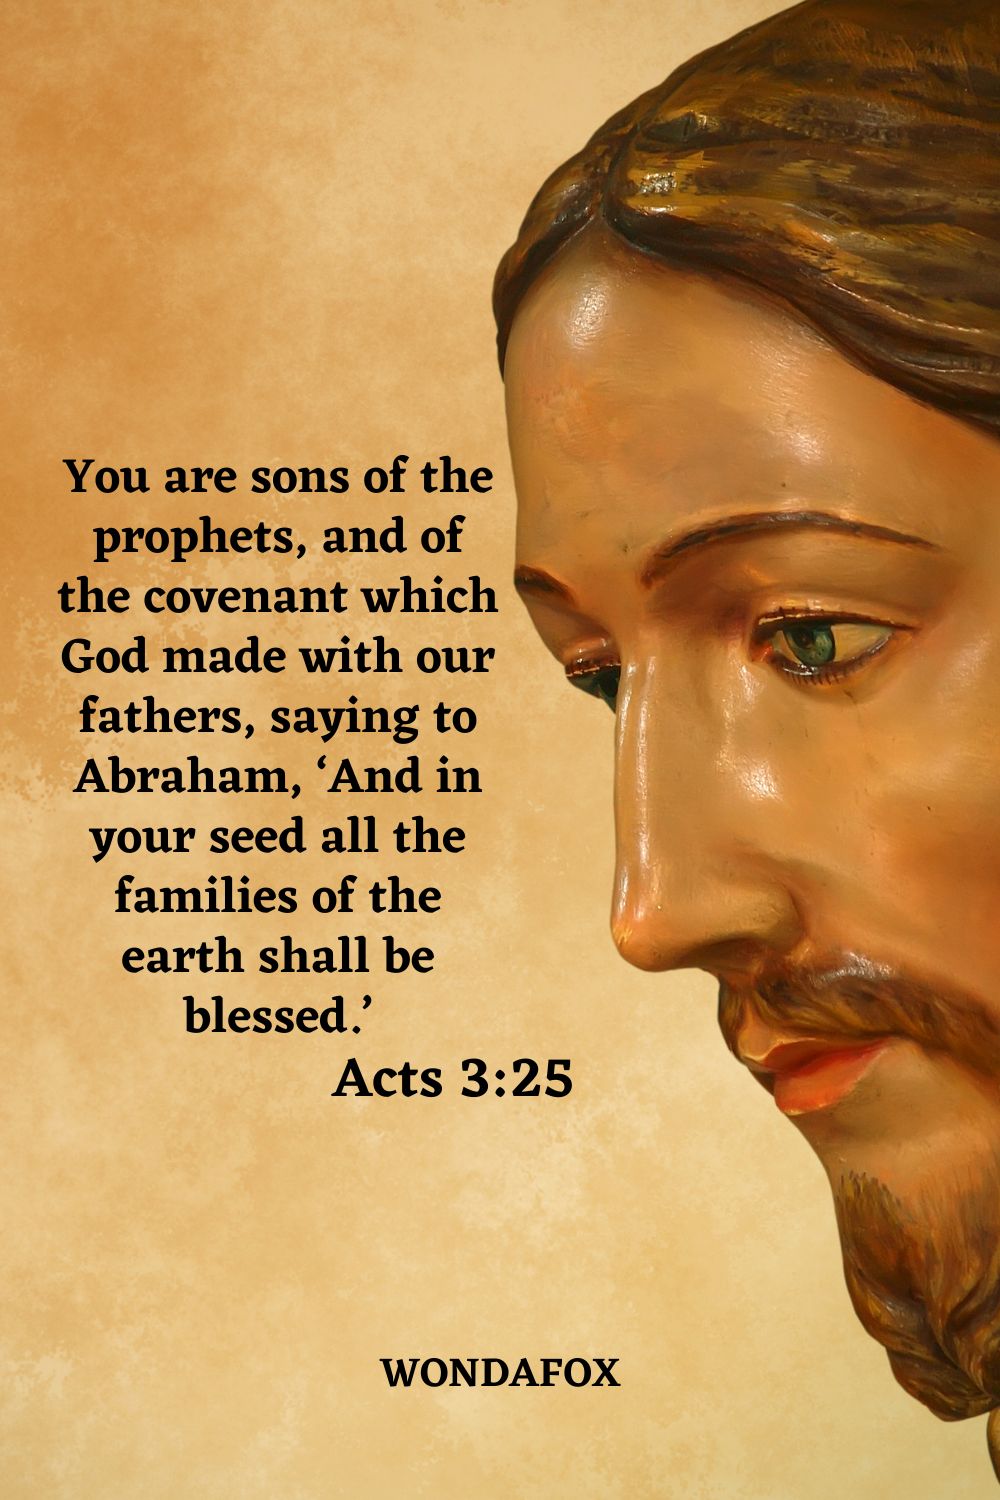 You are sons of the prophets, and of the covenant which God made with our fathers, saying to Abraham, ‘And in your seed all the families of the earth shall be blessed.’
Acts 3:25